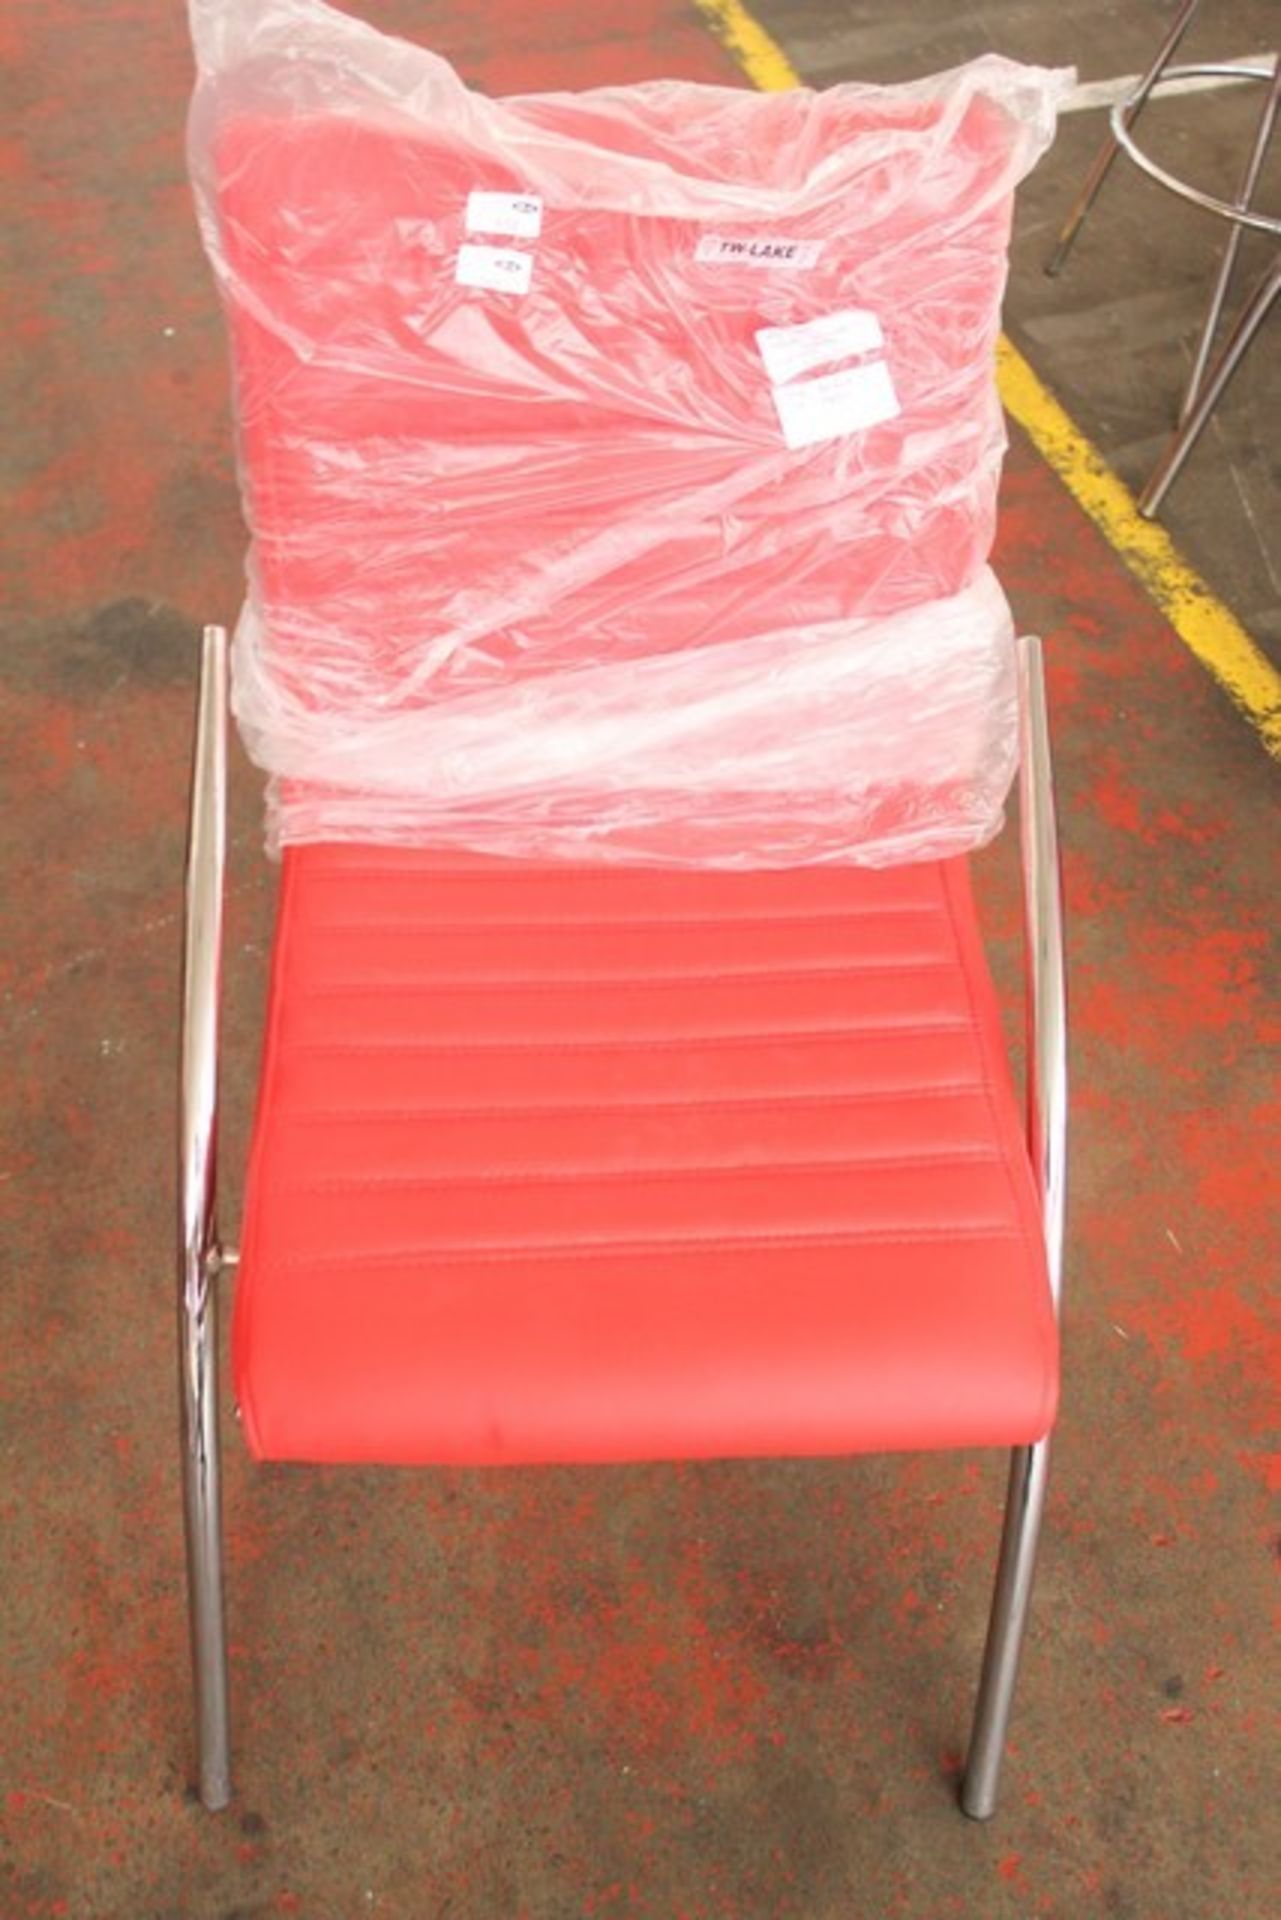 6 x RED LIEBHERR LEATHER AND CHROME DINING CHAIRS IN ONE BOX RRP £85 (660)  *Please note that the